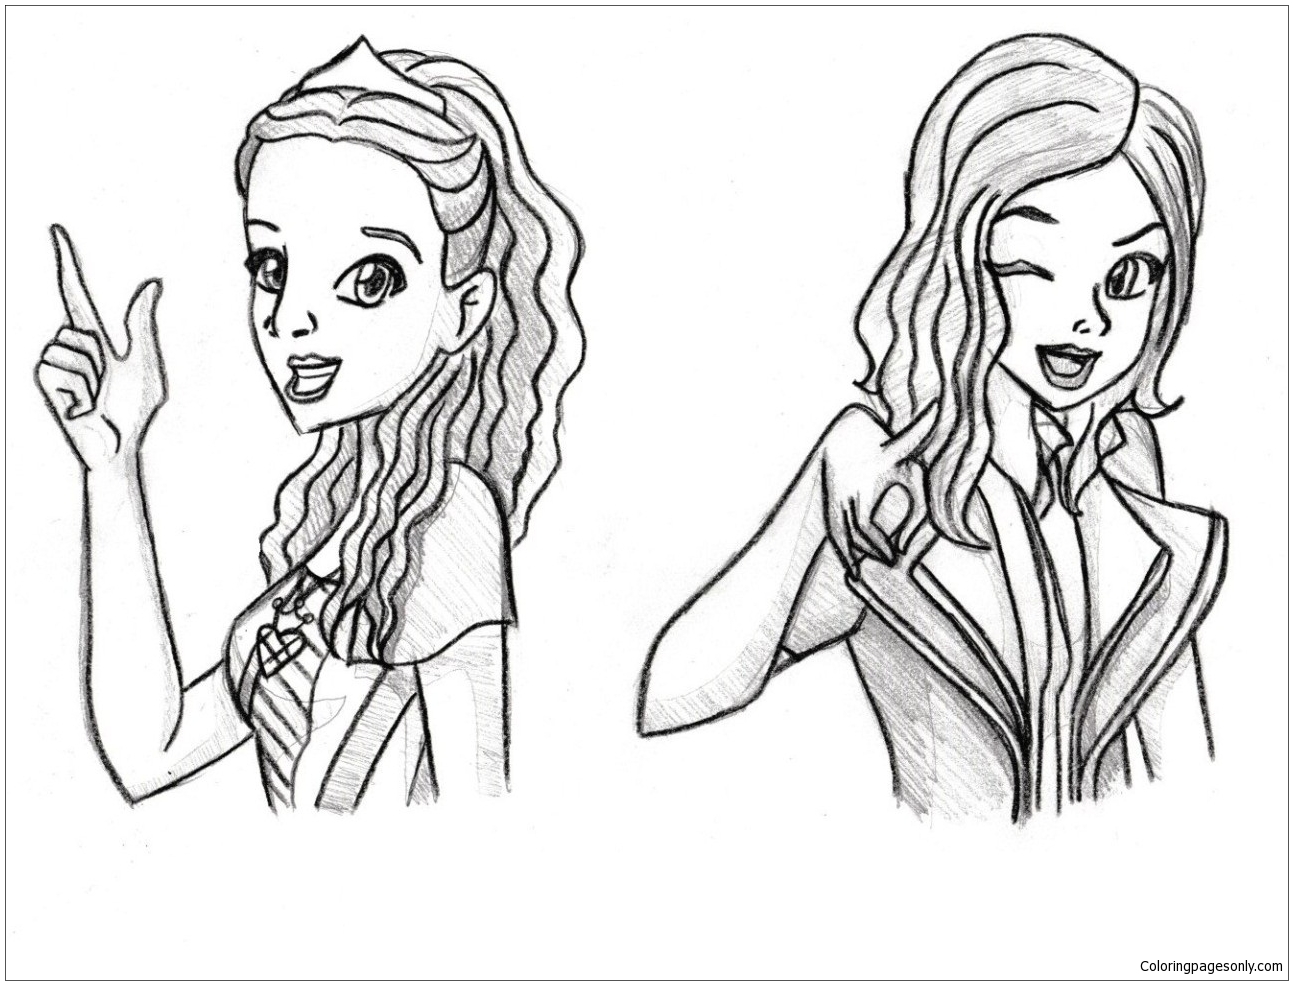 New Disney Descendants Coloring Page - Free Coloring Pages Online